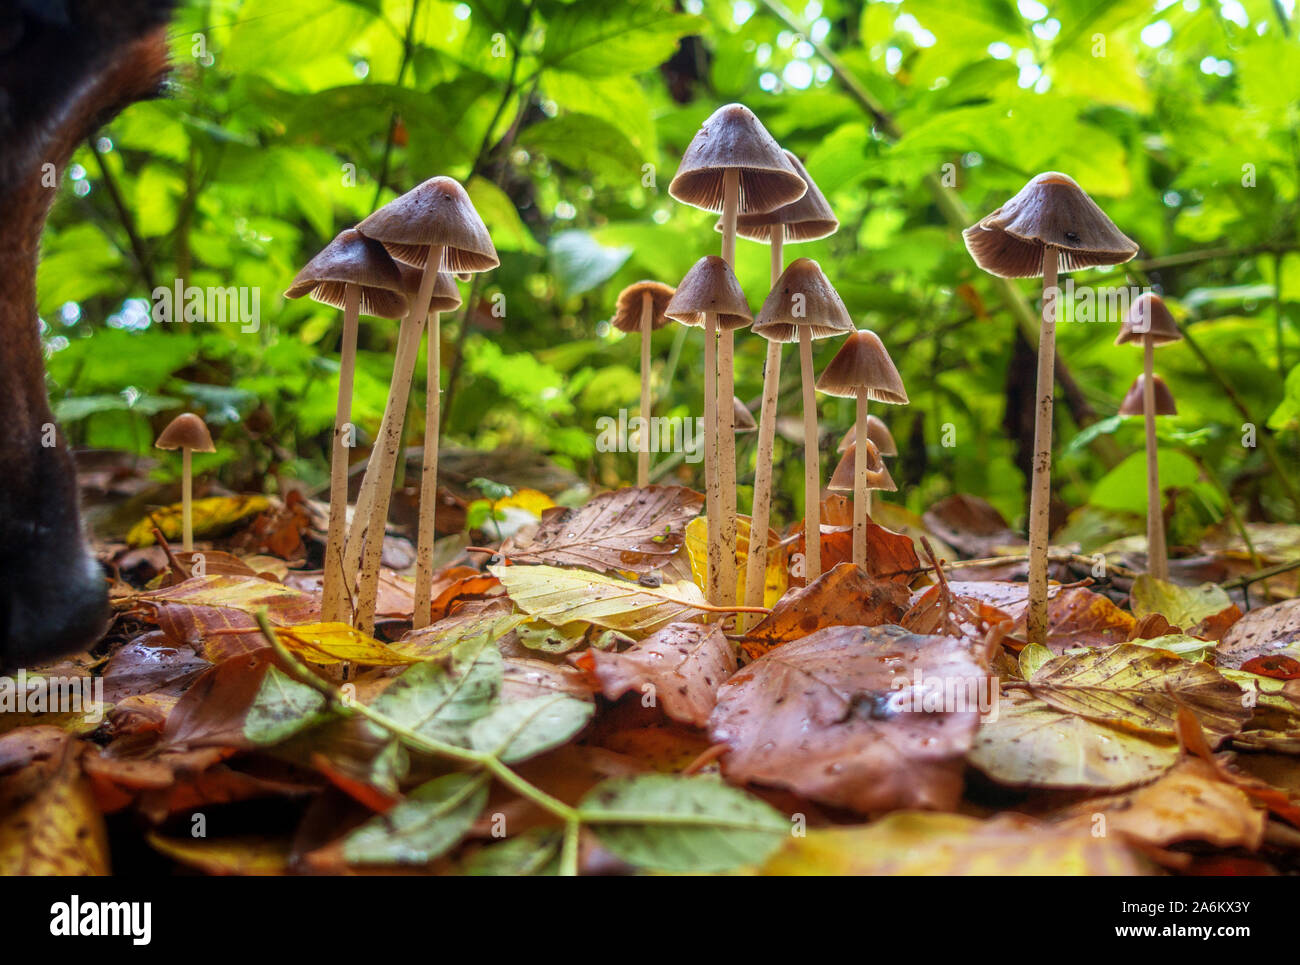 Group of tall toadstools in fallen autumn leaves with a dog investigating nature, UK Stock Photo